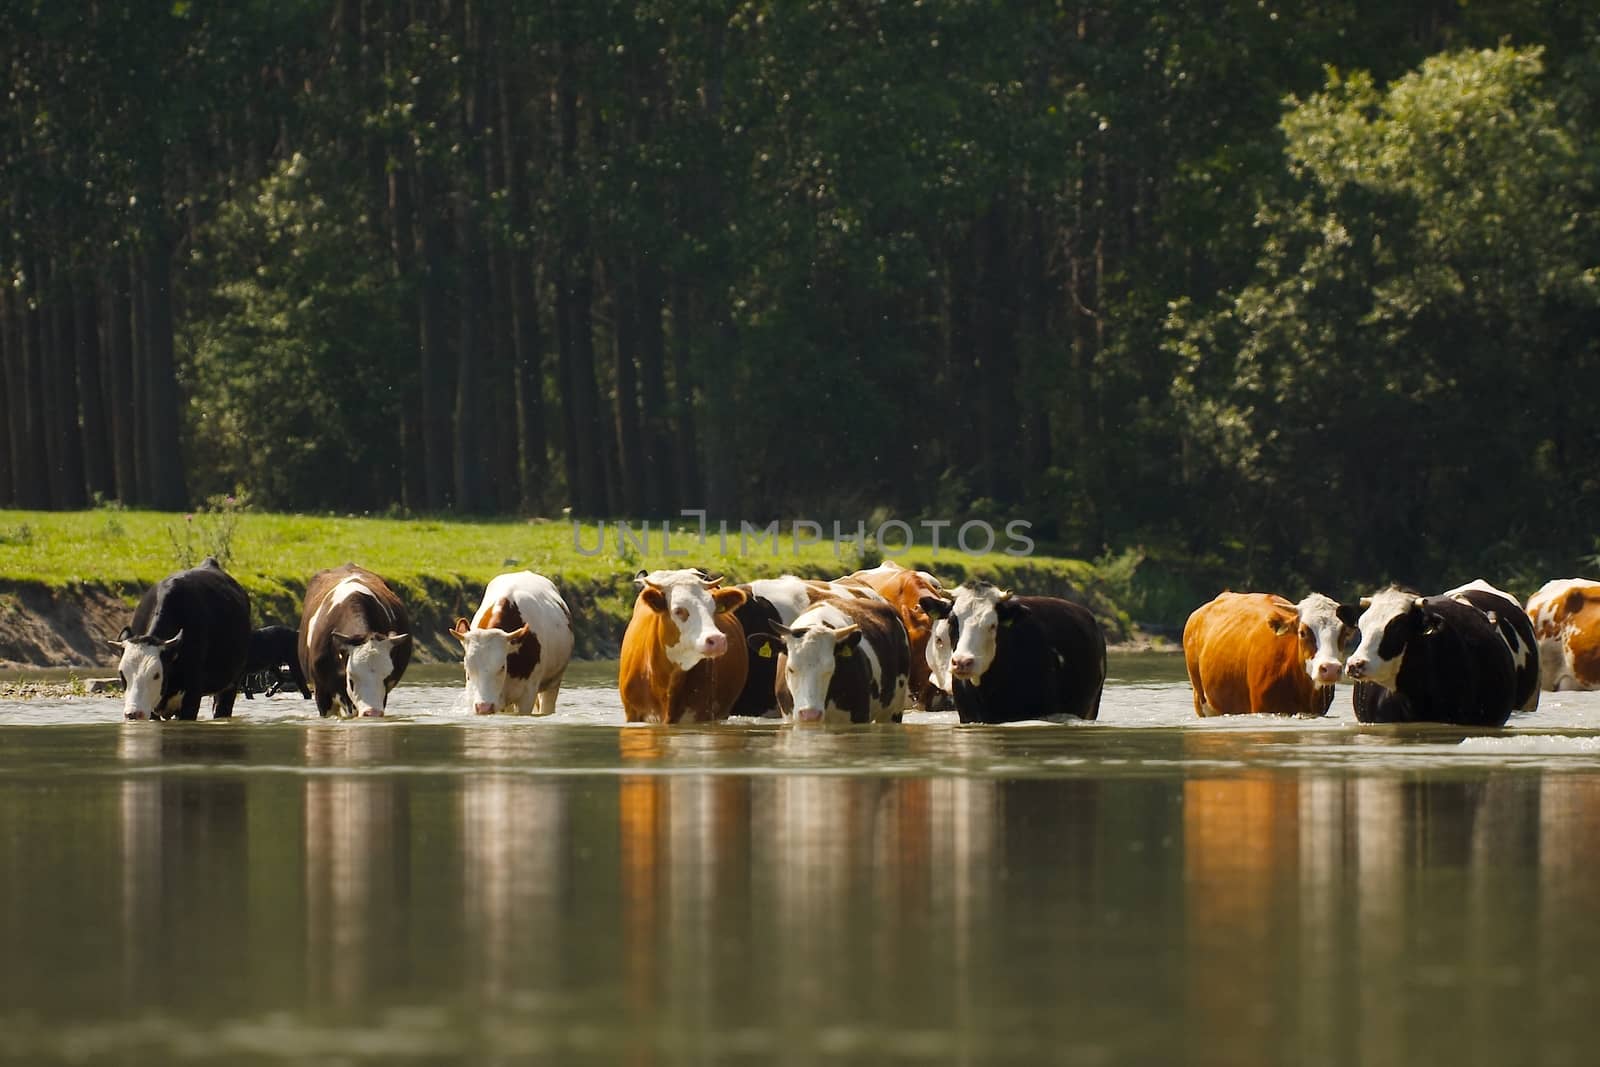 Cows in the water by Gudella